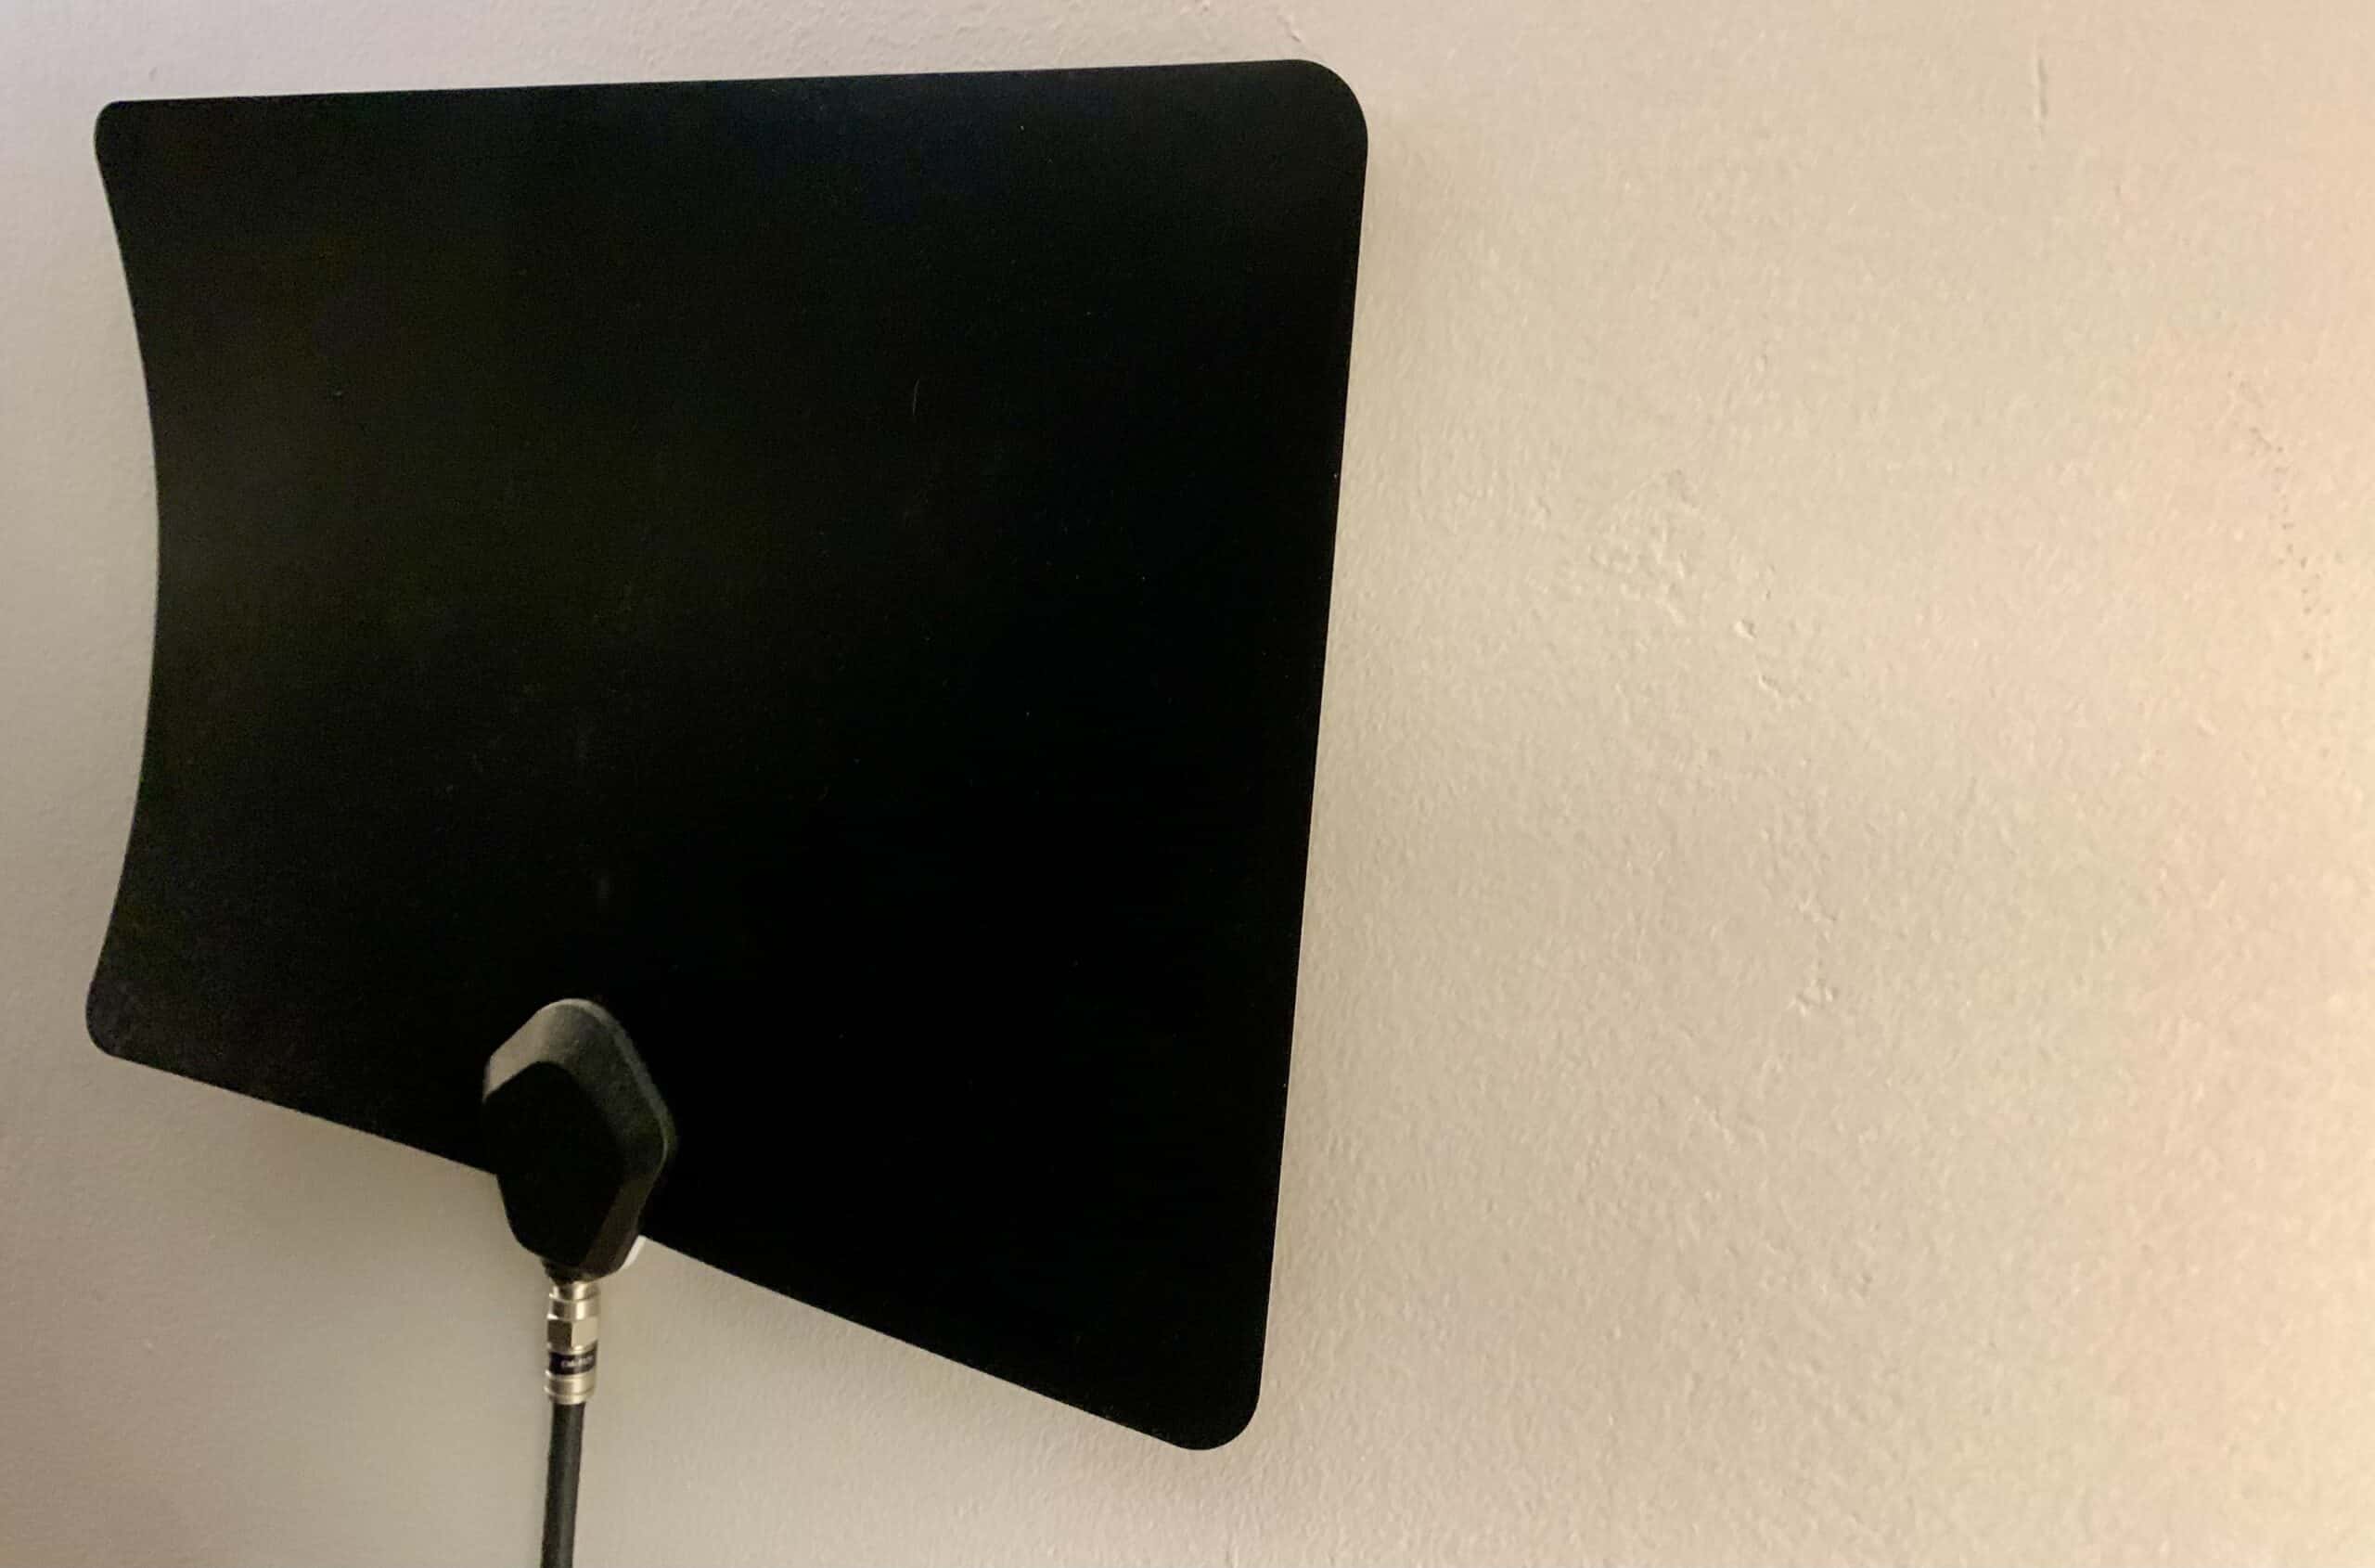 Indoor TV antenna attached to wall.